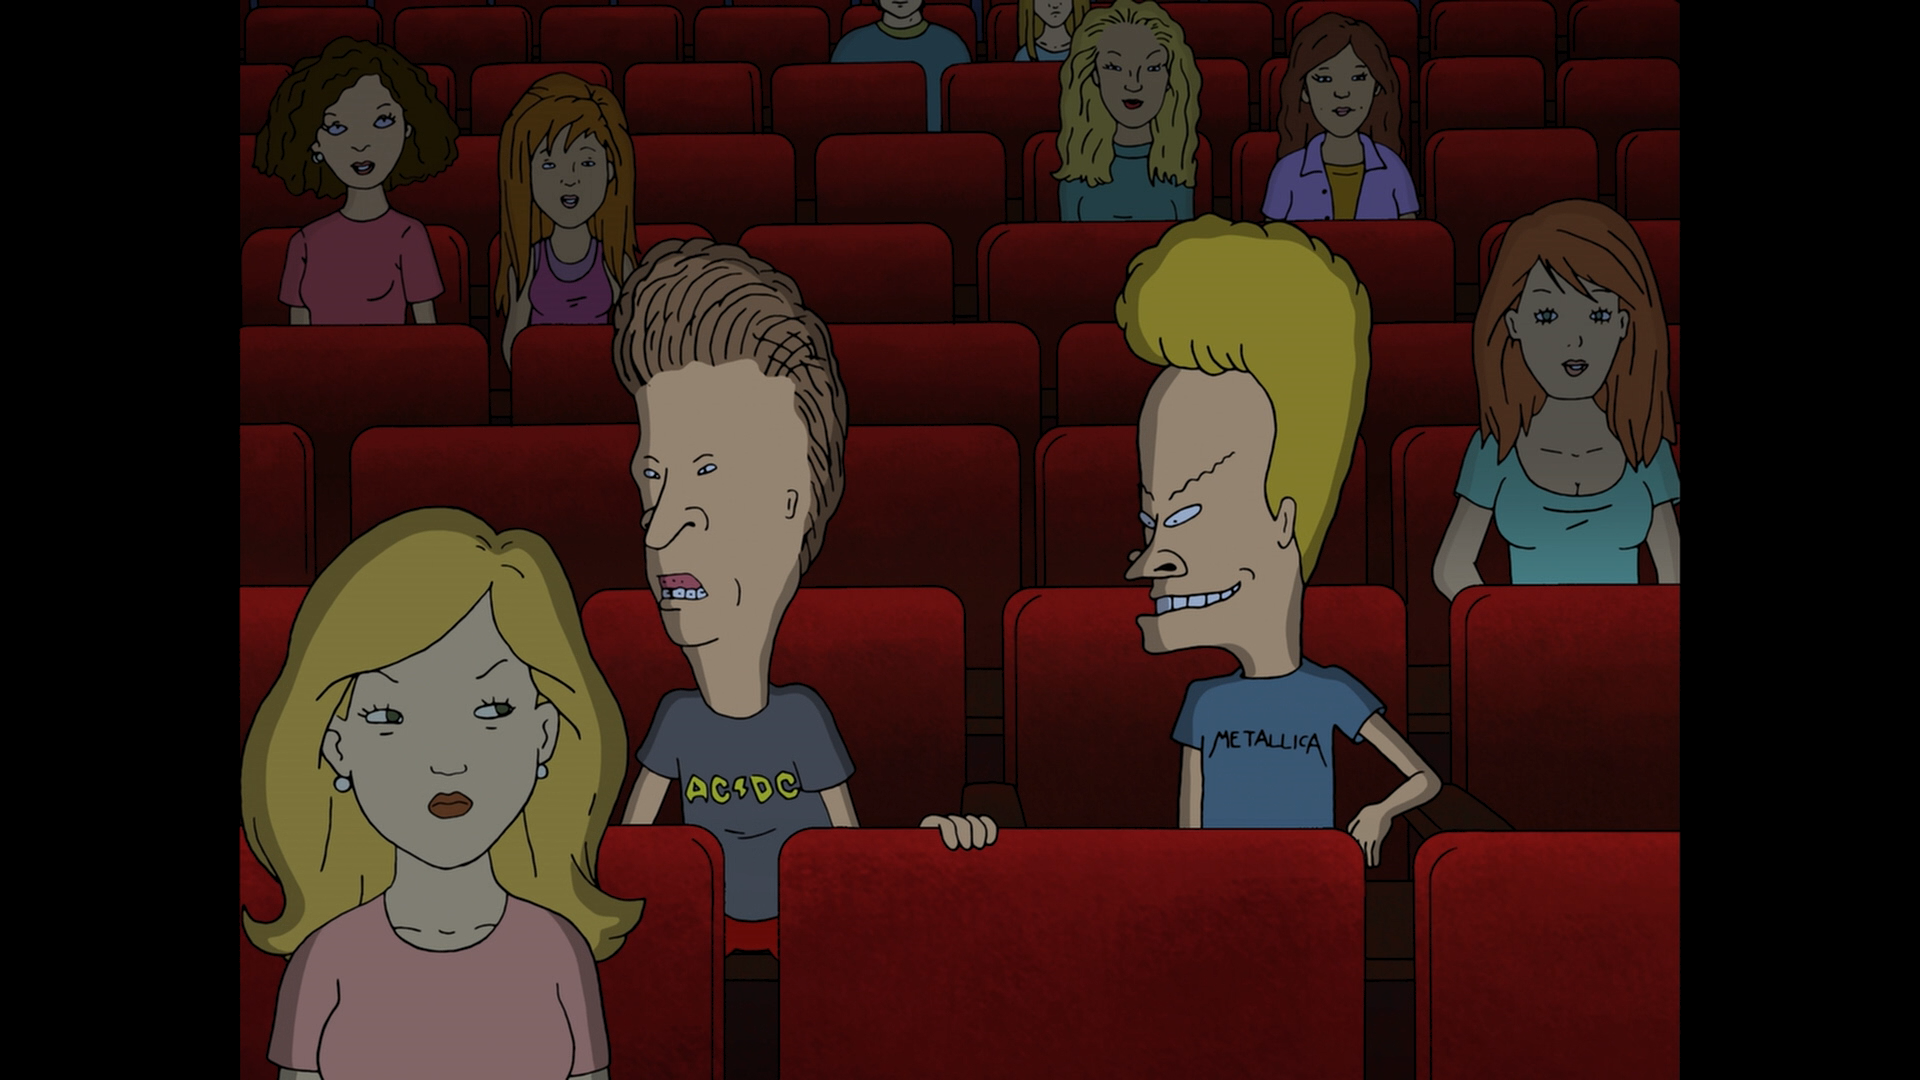 download beavis and butthead new episodes